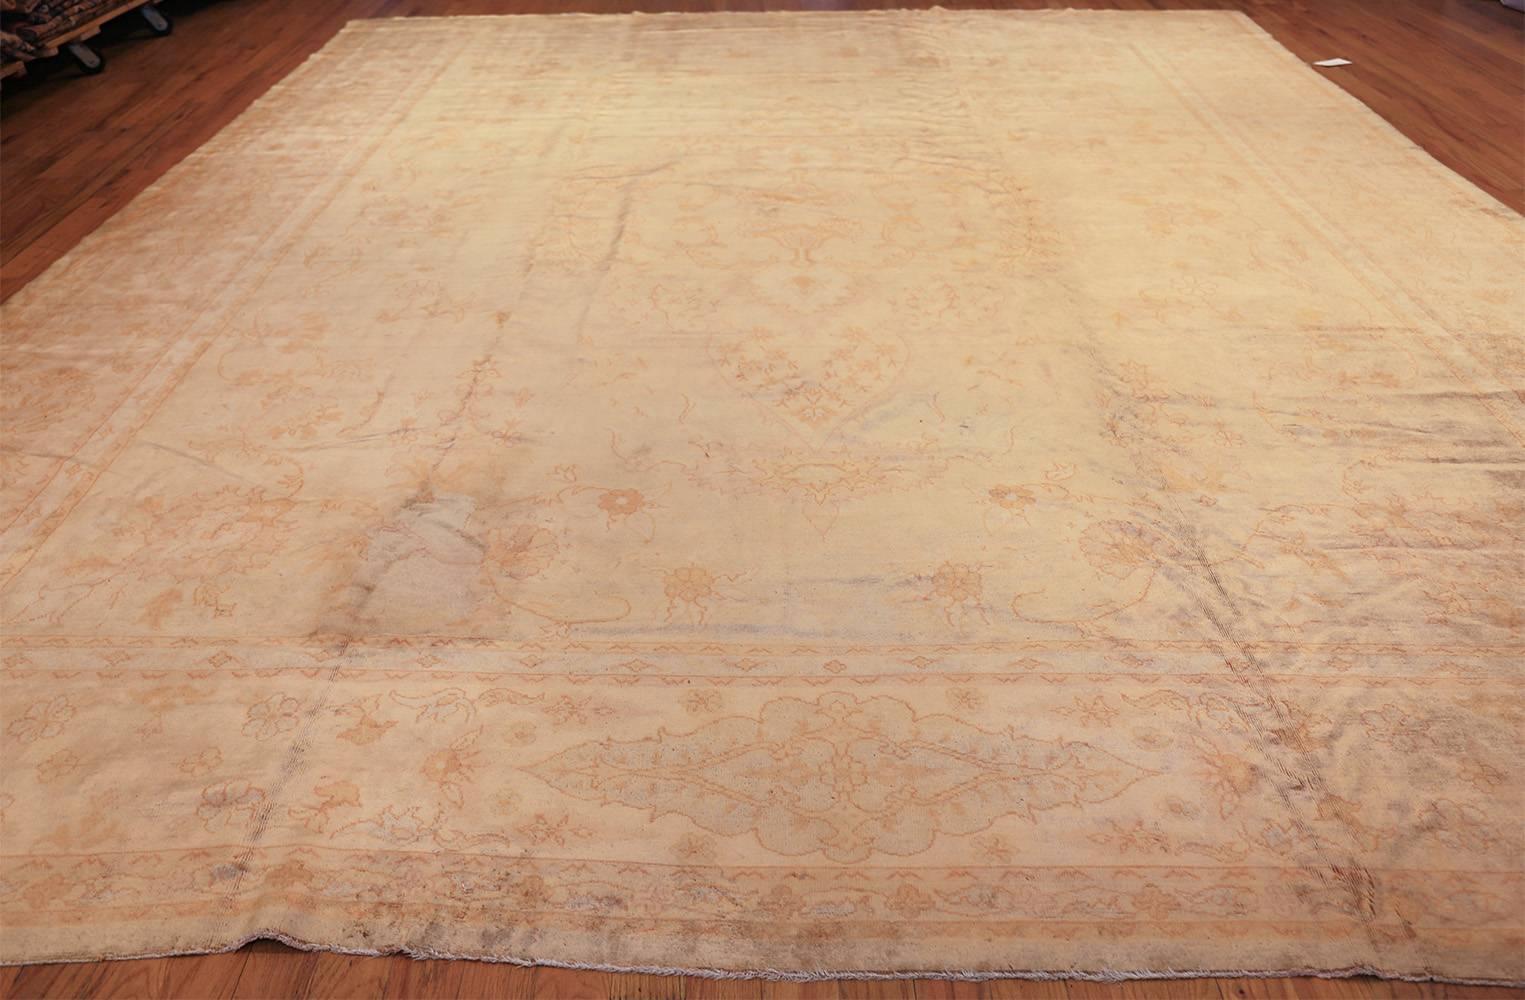 This sumptuous antique Oushak from Turkey is exceptional by virtue of its meticulous, elegant drawing.

Beautiful fine and extremely decorative large antique Turkish oushak rug, Country of origin: Turkey, circa date: 1900 – This sumptuous antique